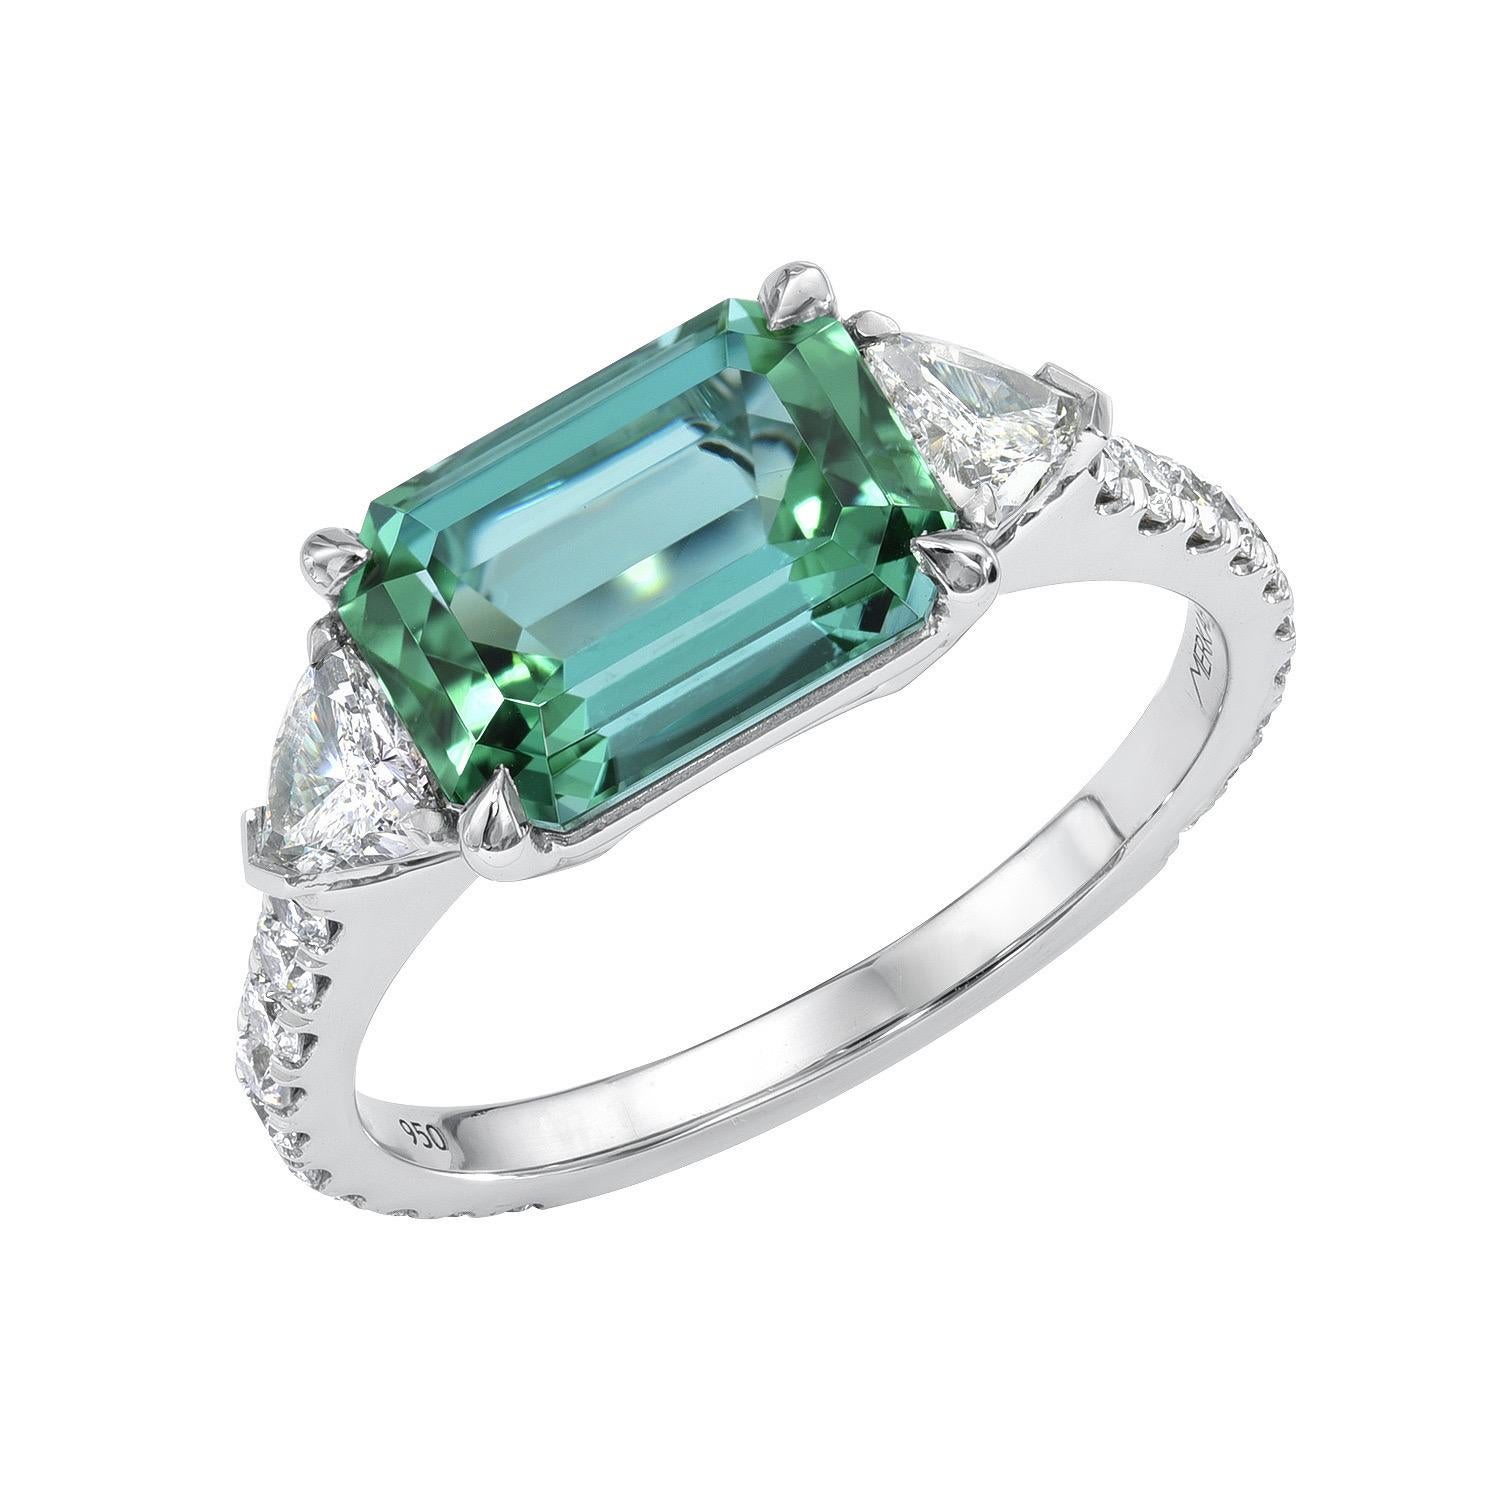 Exceptional 2.69 carat Lagoon Green Tourmaline Emerald-Cut platinum ring, flanked by a pair of 0.31 carat Trillion diamonds, and decorated with a total of 0.39 carat round brilliant diamonds.
Ring size 6.5. Resizing is complementary upon